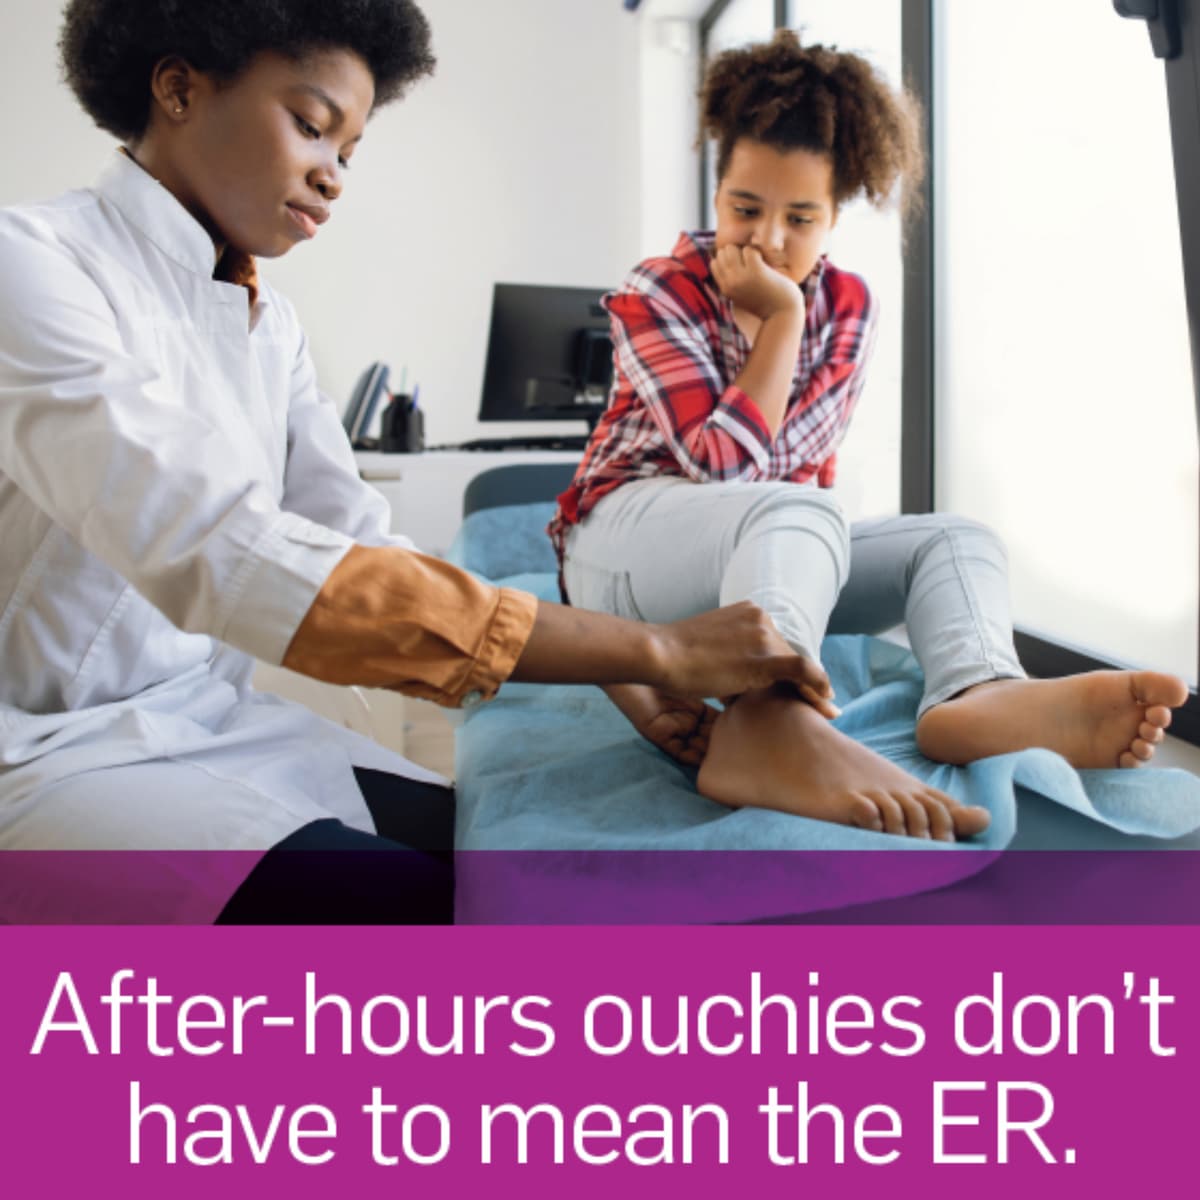 A female healthcare worker assesses the right ankle injury of a young teenage girl sitting on the exam table in a clinic with the words, "After-hours ouchies don't have to mean the ER."